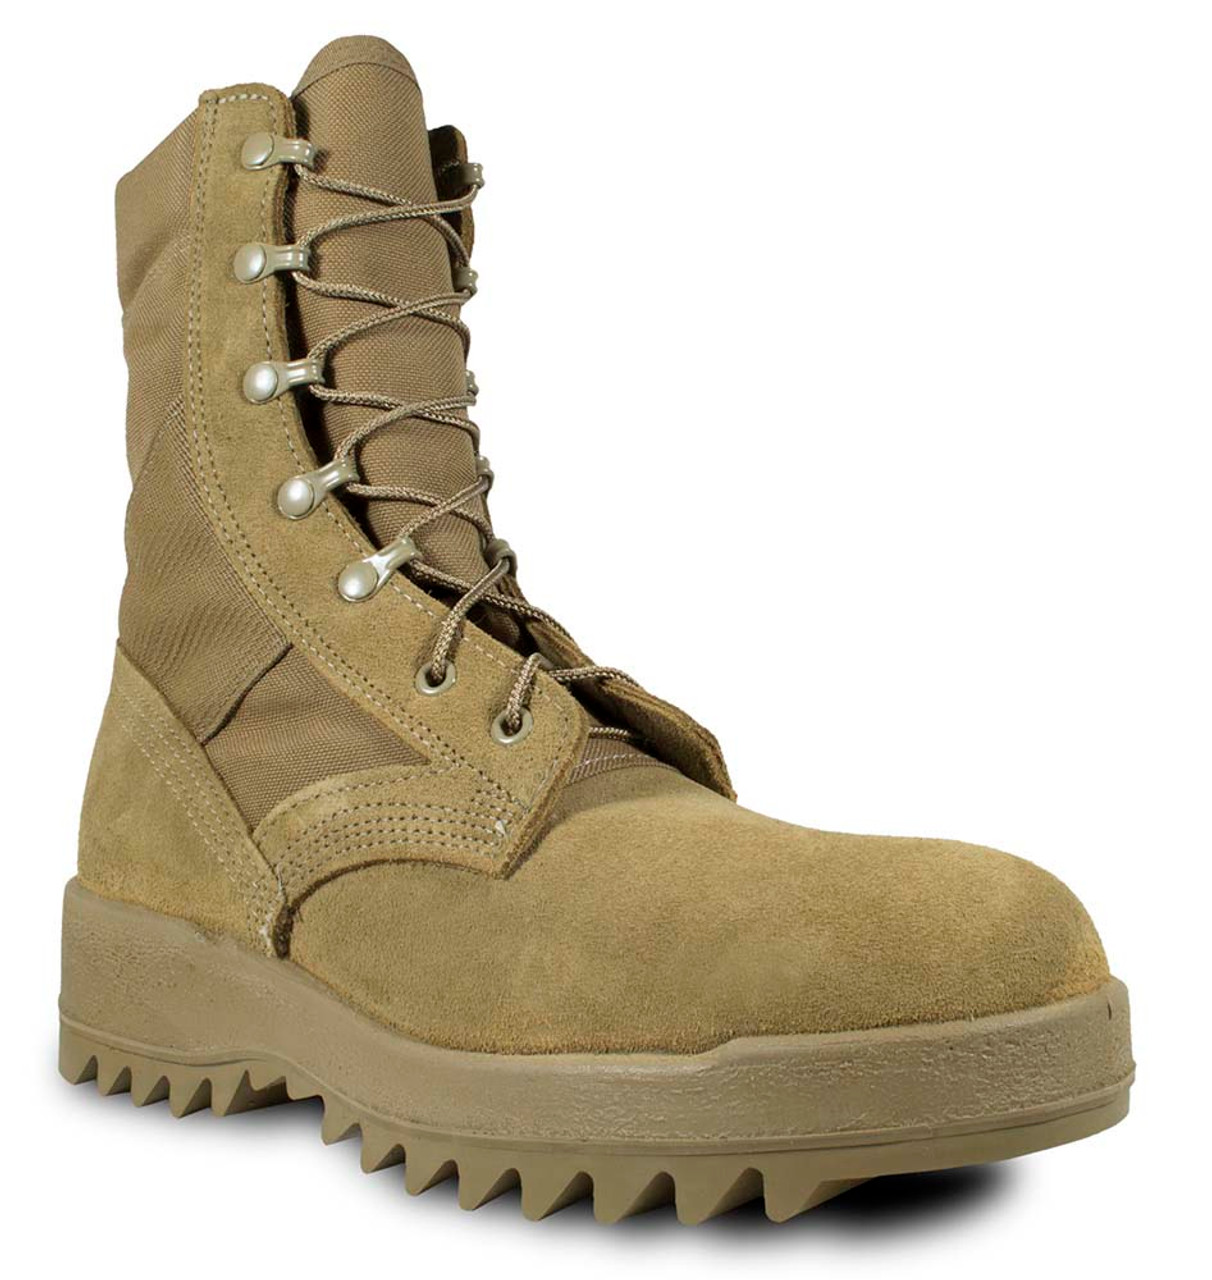 McRae 8" Hot Weather Coyote Ripple Sole Combat Boot USA-Made 8188